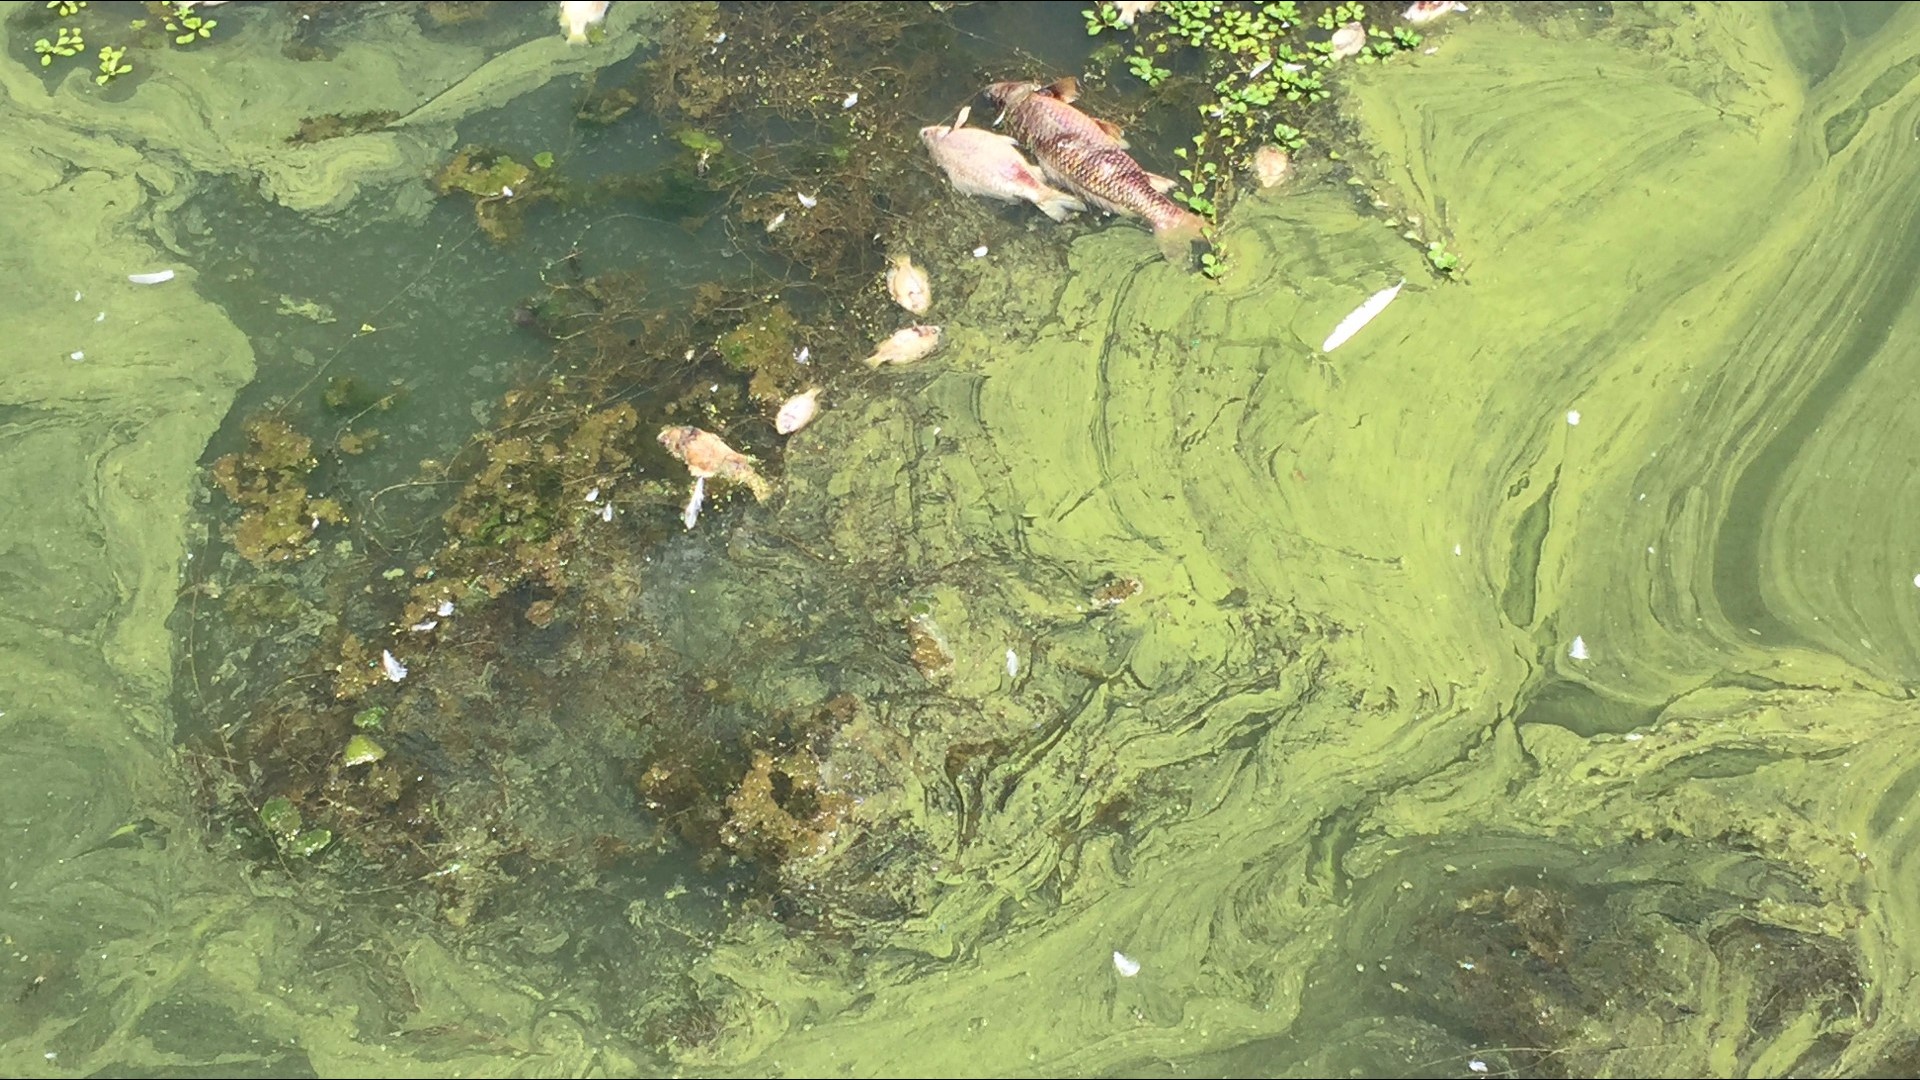 Labor Day weekend is an opportunity for many people to take advantage of local lakes and rivers. This year, however, the recreation is coming with a warning. California Parks & Rec is telling people about the possibility of cyanobacteria, also called blue-green algae.